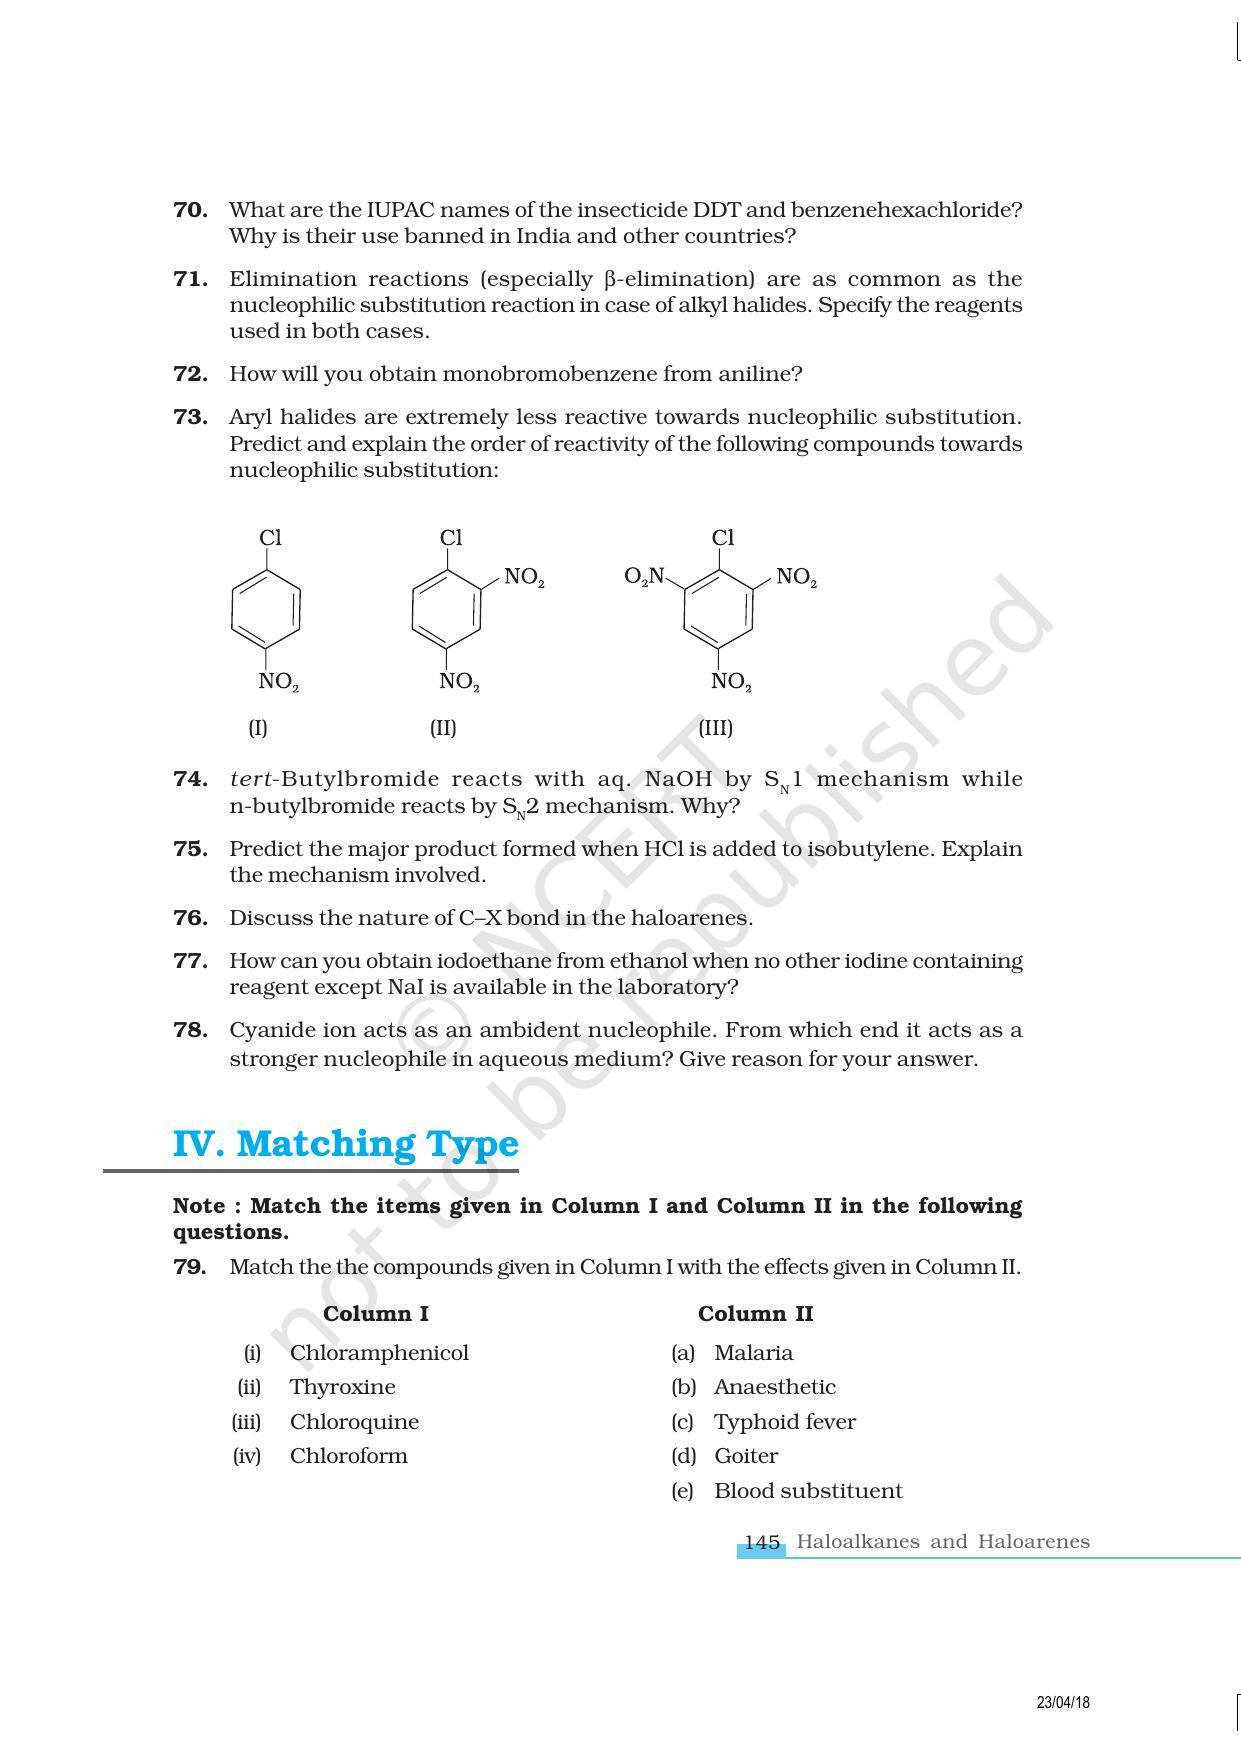 NCERT Exemplar Book for Class 12 Chemistry: Chapter 10 Haloalkanes and Haloarenes - Page 13